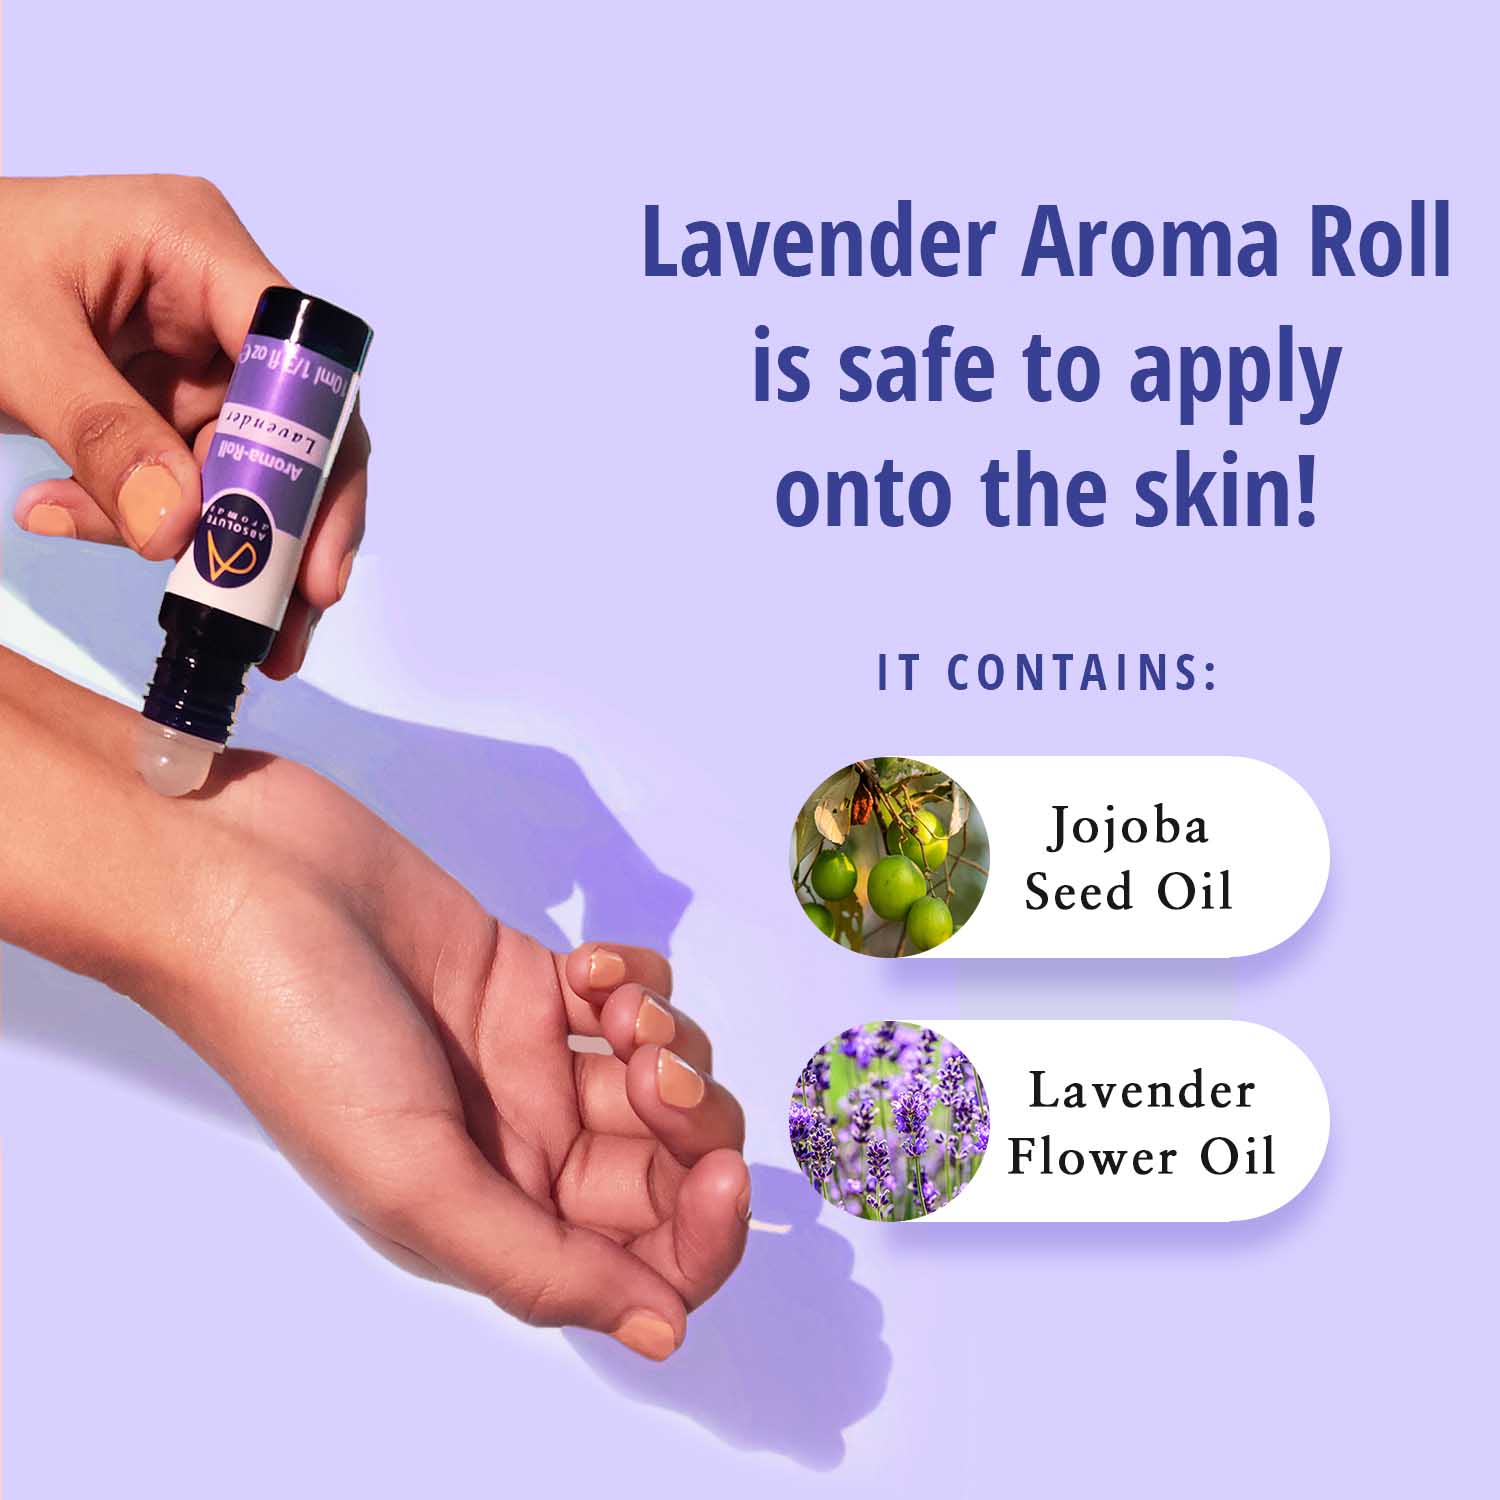 Lavender Aroma Roll is safe to apply onto the skin